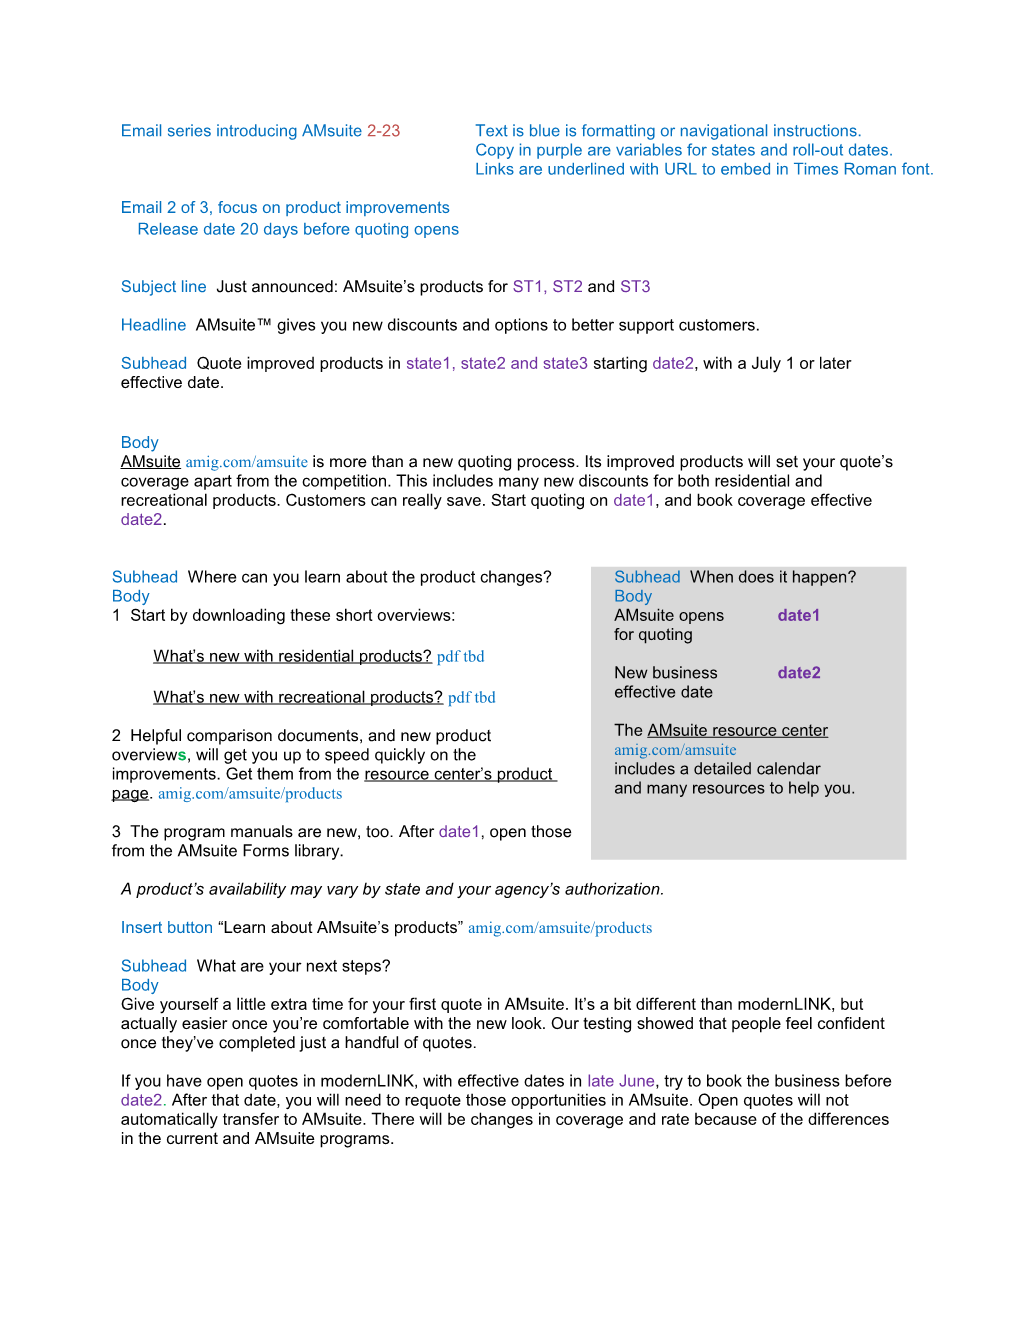 Email Series Introducing Amsuite 2-23 Text Is Blue Is Formatting Or Navigational Instructions